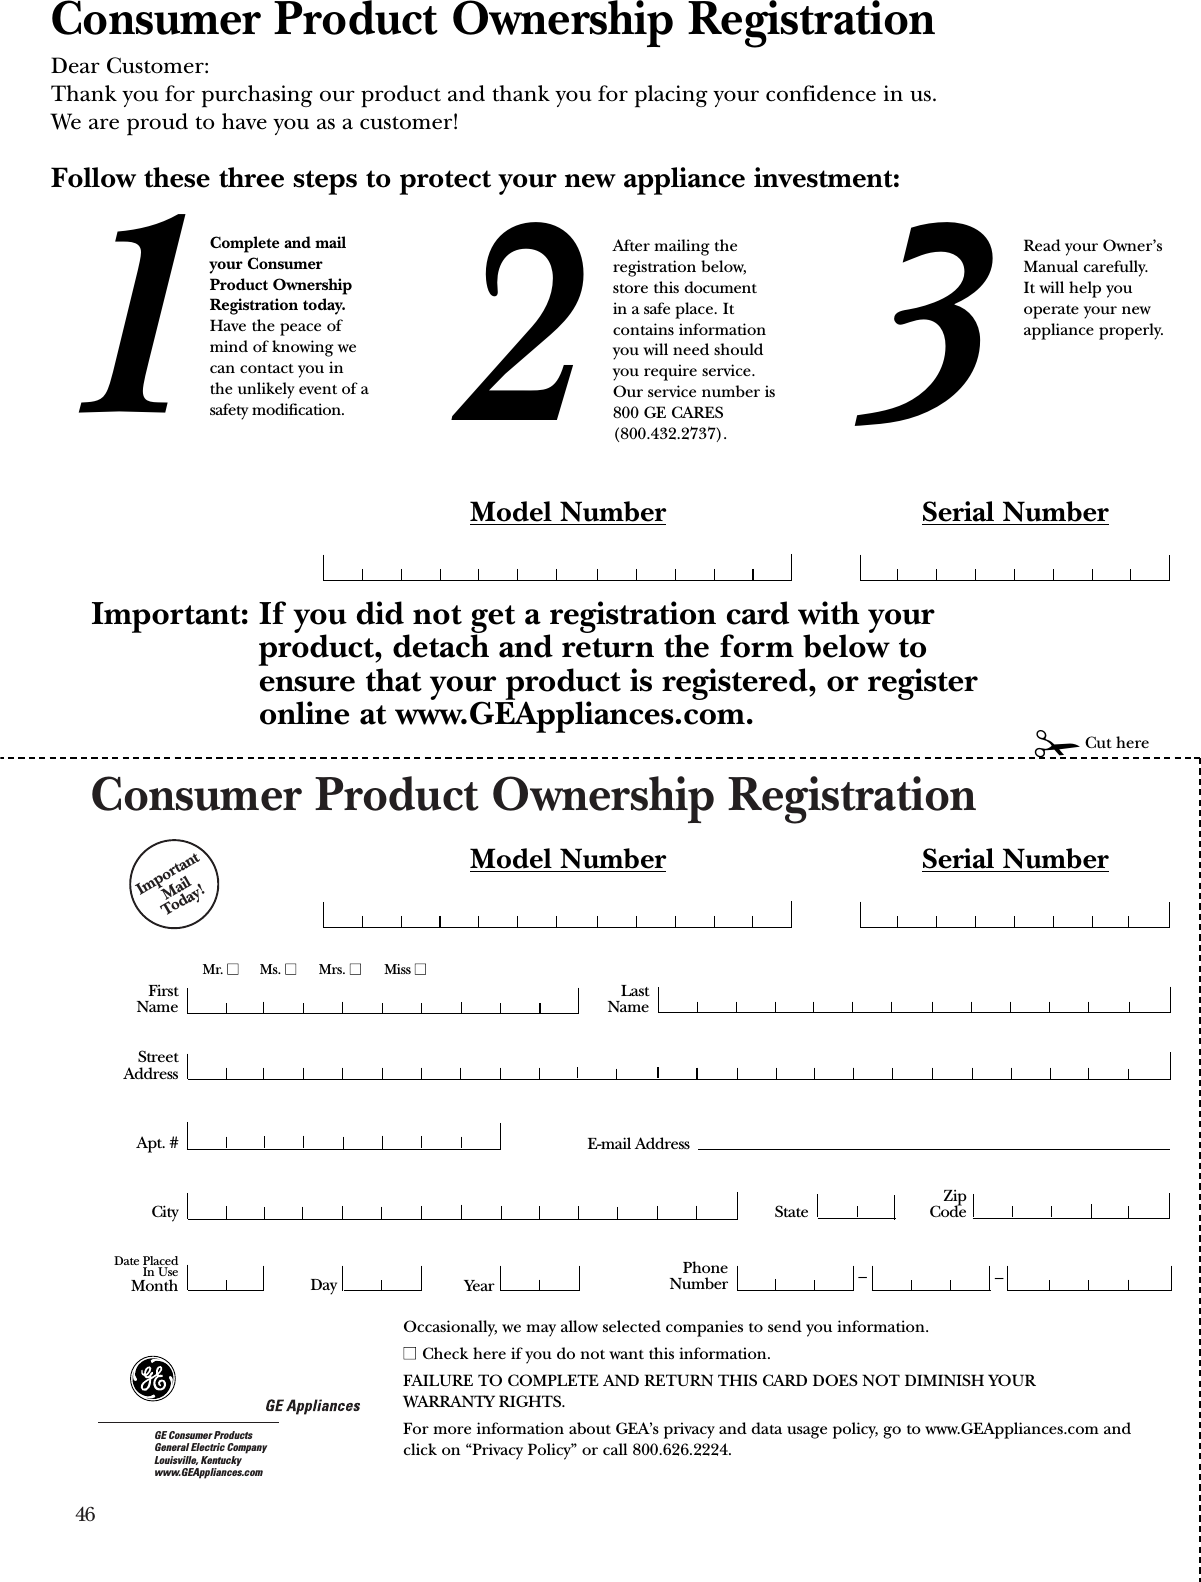 46Consumer Product Ownership RegistrationImportantMail Today!GE Consumer ProductsGeneral Electric CompanyLouisville, Kentuckywww.GEAppliances.comFirstNameMr. ■■Ms. ■■Mrs. ■■Miss ■■StreetAddressCity StateDate PlacedIn UseMonth Day YearZipCodeApt. #LastNamePhoneNumber __Consumer Product Ownership RegistrationDear Customer:Thank you for purchasing our product and thank you for placing your confidence in us. We are proud to have you as a customer!Follow these three steps to protect your new appliance investment:Important: If you did not get a registration card with yourproduct, detach and return the form below toensure that your product is registered, or registeronline at www.GEAppliances.com.123Model Number Serial Number✁Cut hereComplete and mailyour ConsumerProduct OwnershipRegistration today.Have the peace ofmind of knowing wecan contact you inthe unlikely event of asafety modification.After mailing theregistration below, store this document in a safe place. Itcontains informationyou will need should you require service. Our service number is800 GE CARES (800.432.2737).Read your Owner’sManual carefully.It will help youoperate your newappliance properly. Model Number Serial NumberE-mail AddressOccasionally, we may allow selected companies to send you information.■■ Check here if you do not want this information.FAILURE TO COMPLETE AND RETURN THIS CARD DOES NOT DIMINISH YOUR WARRANTY RIGHTS.For more information about GEA’s privacy and data usage policy, go to www.GEAppliances.com and click on “Privacy Policy” or call 800.626.2224.